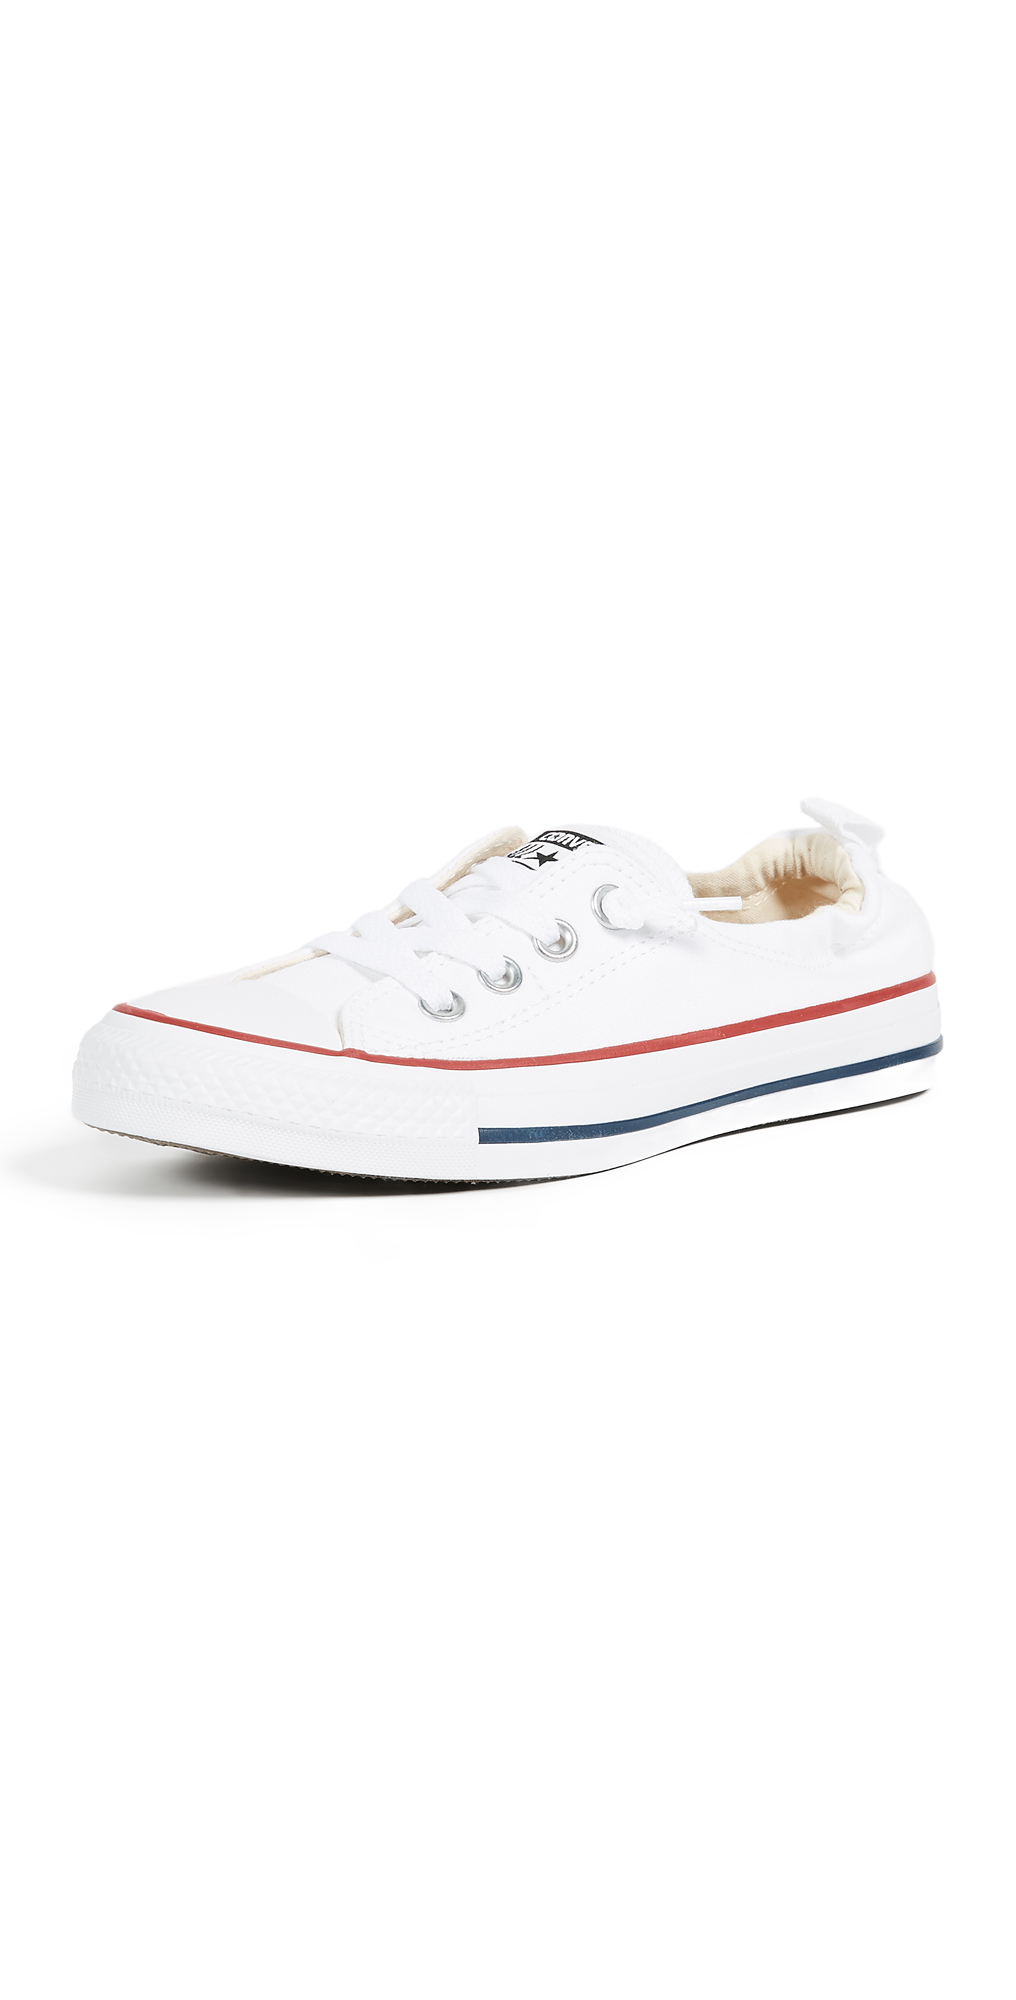 Buy Converse Chuck Taylor All Star Shoreline Slip On Shoes Online ...